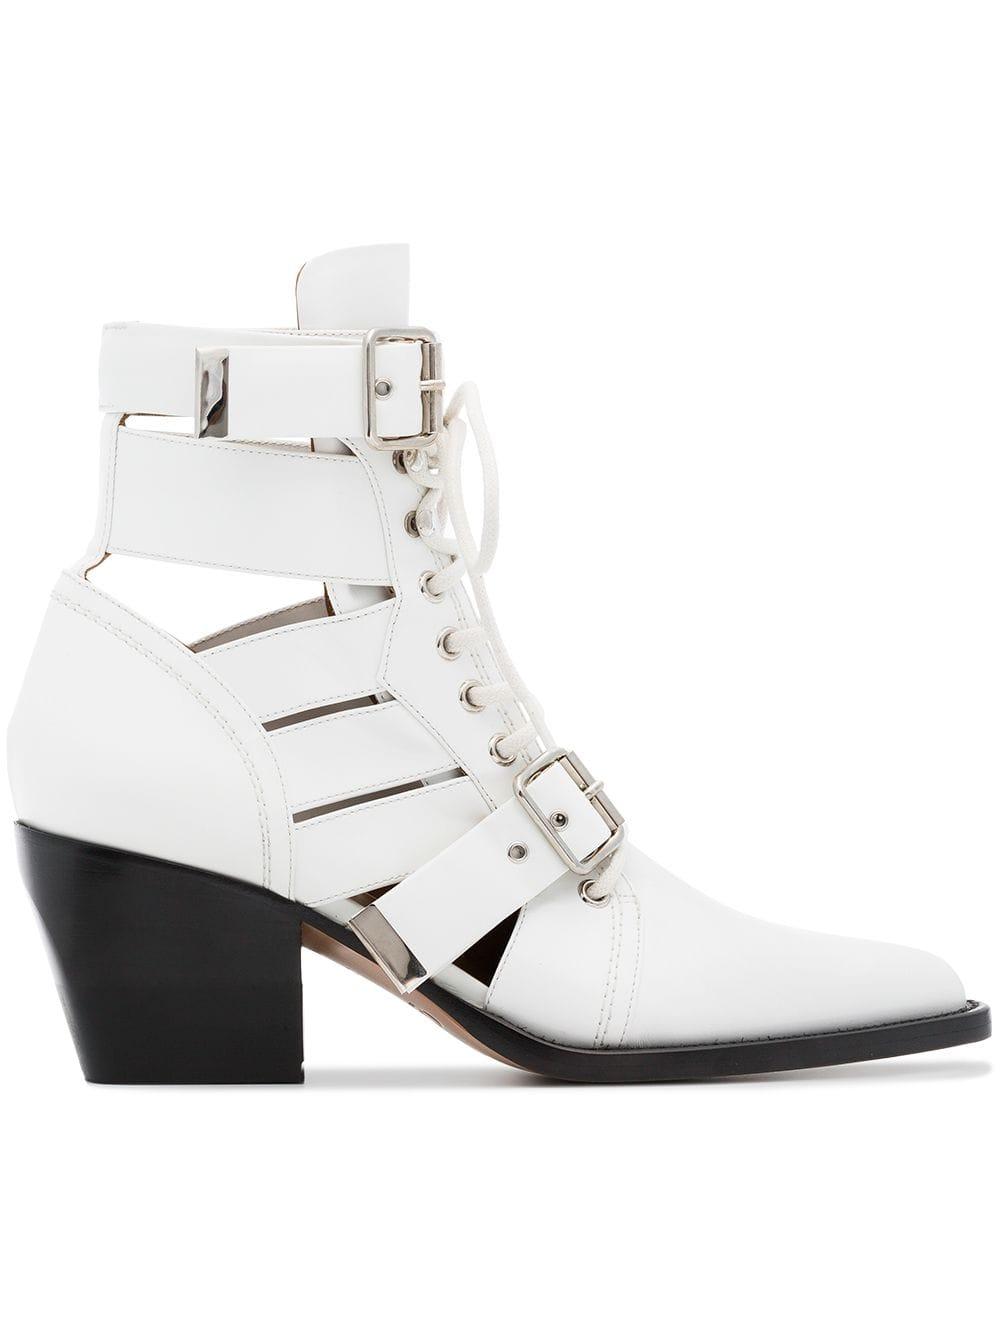 Chloé Leather Rylee 60 Ankle Boots in White - Save 60% - Lyst